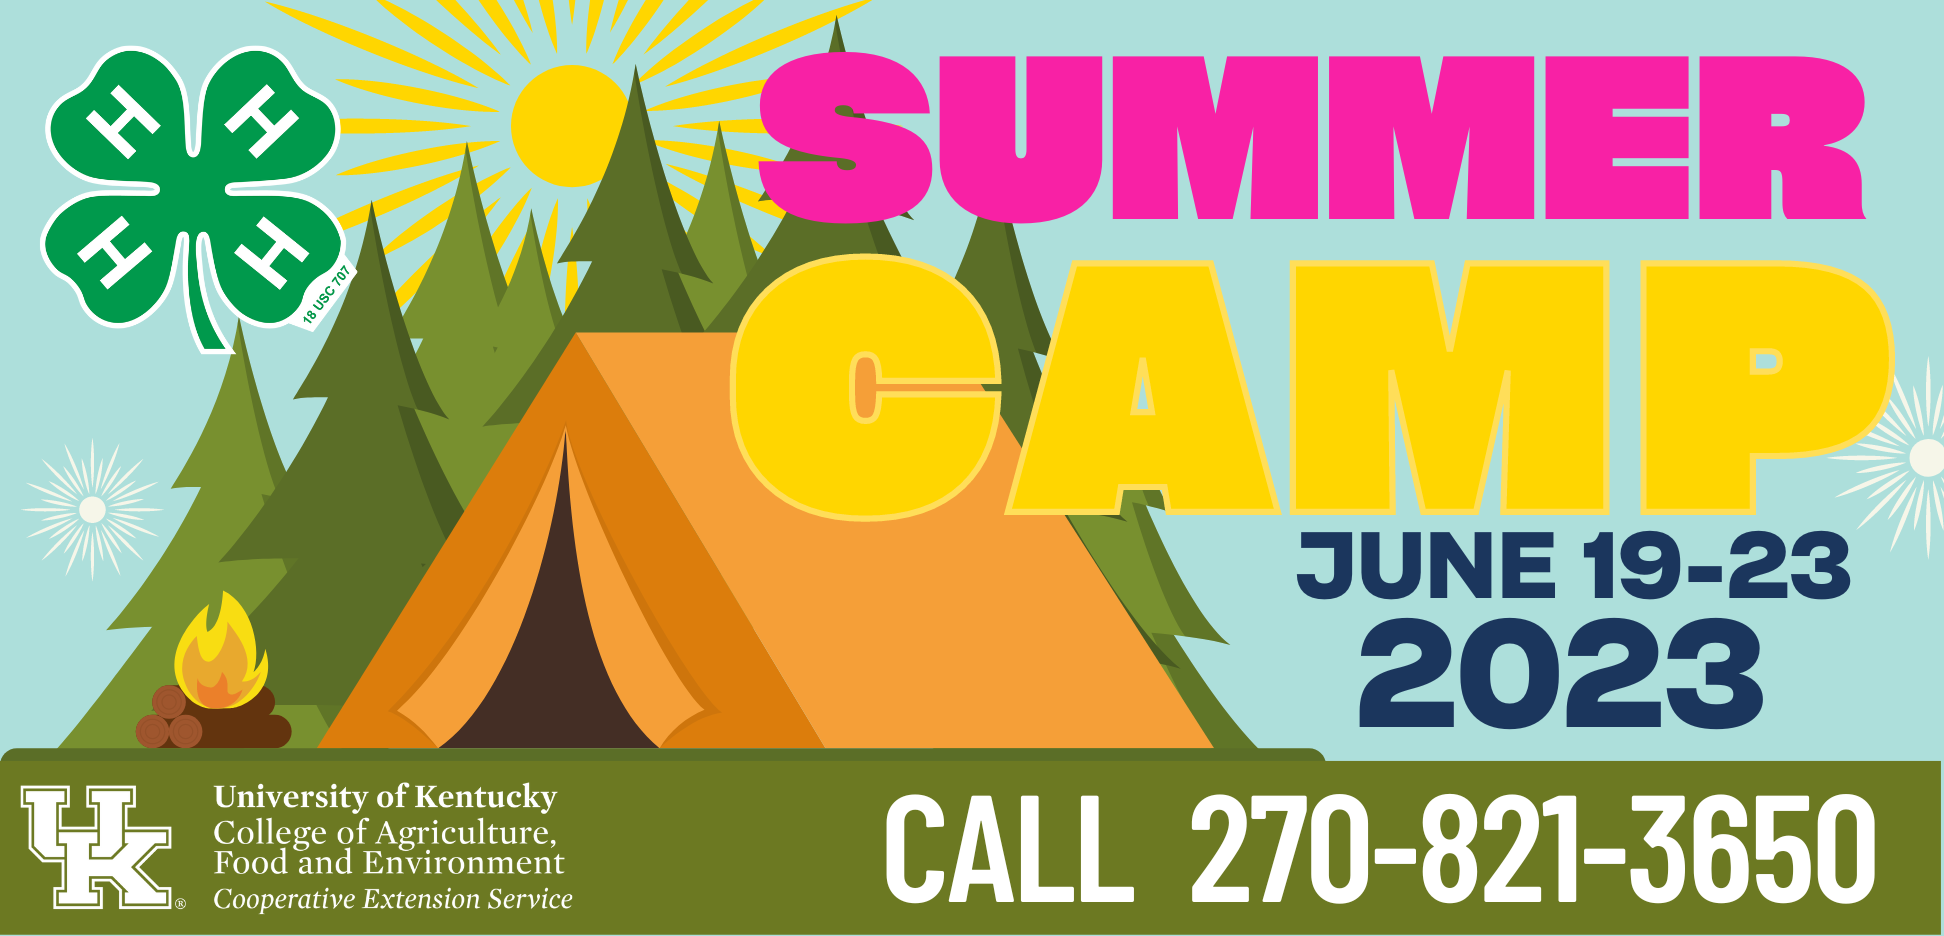 4-H Summer Camp will be held June 19-23, 2023